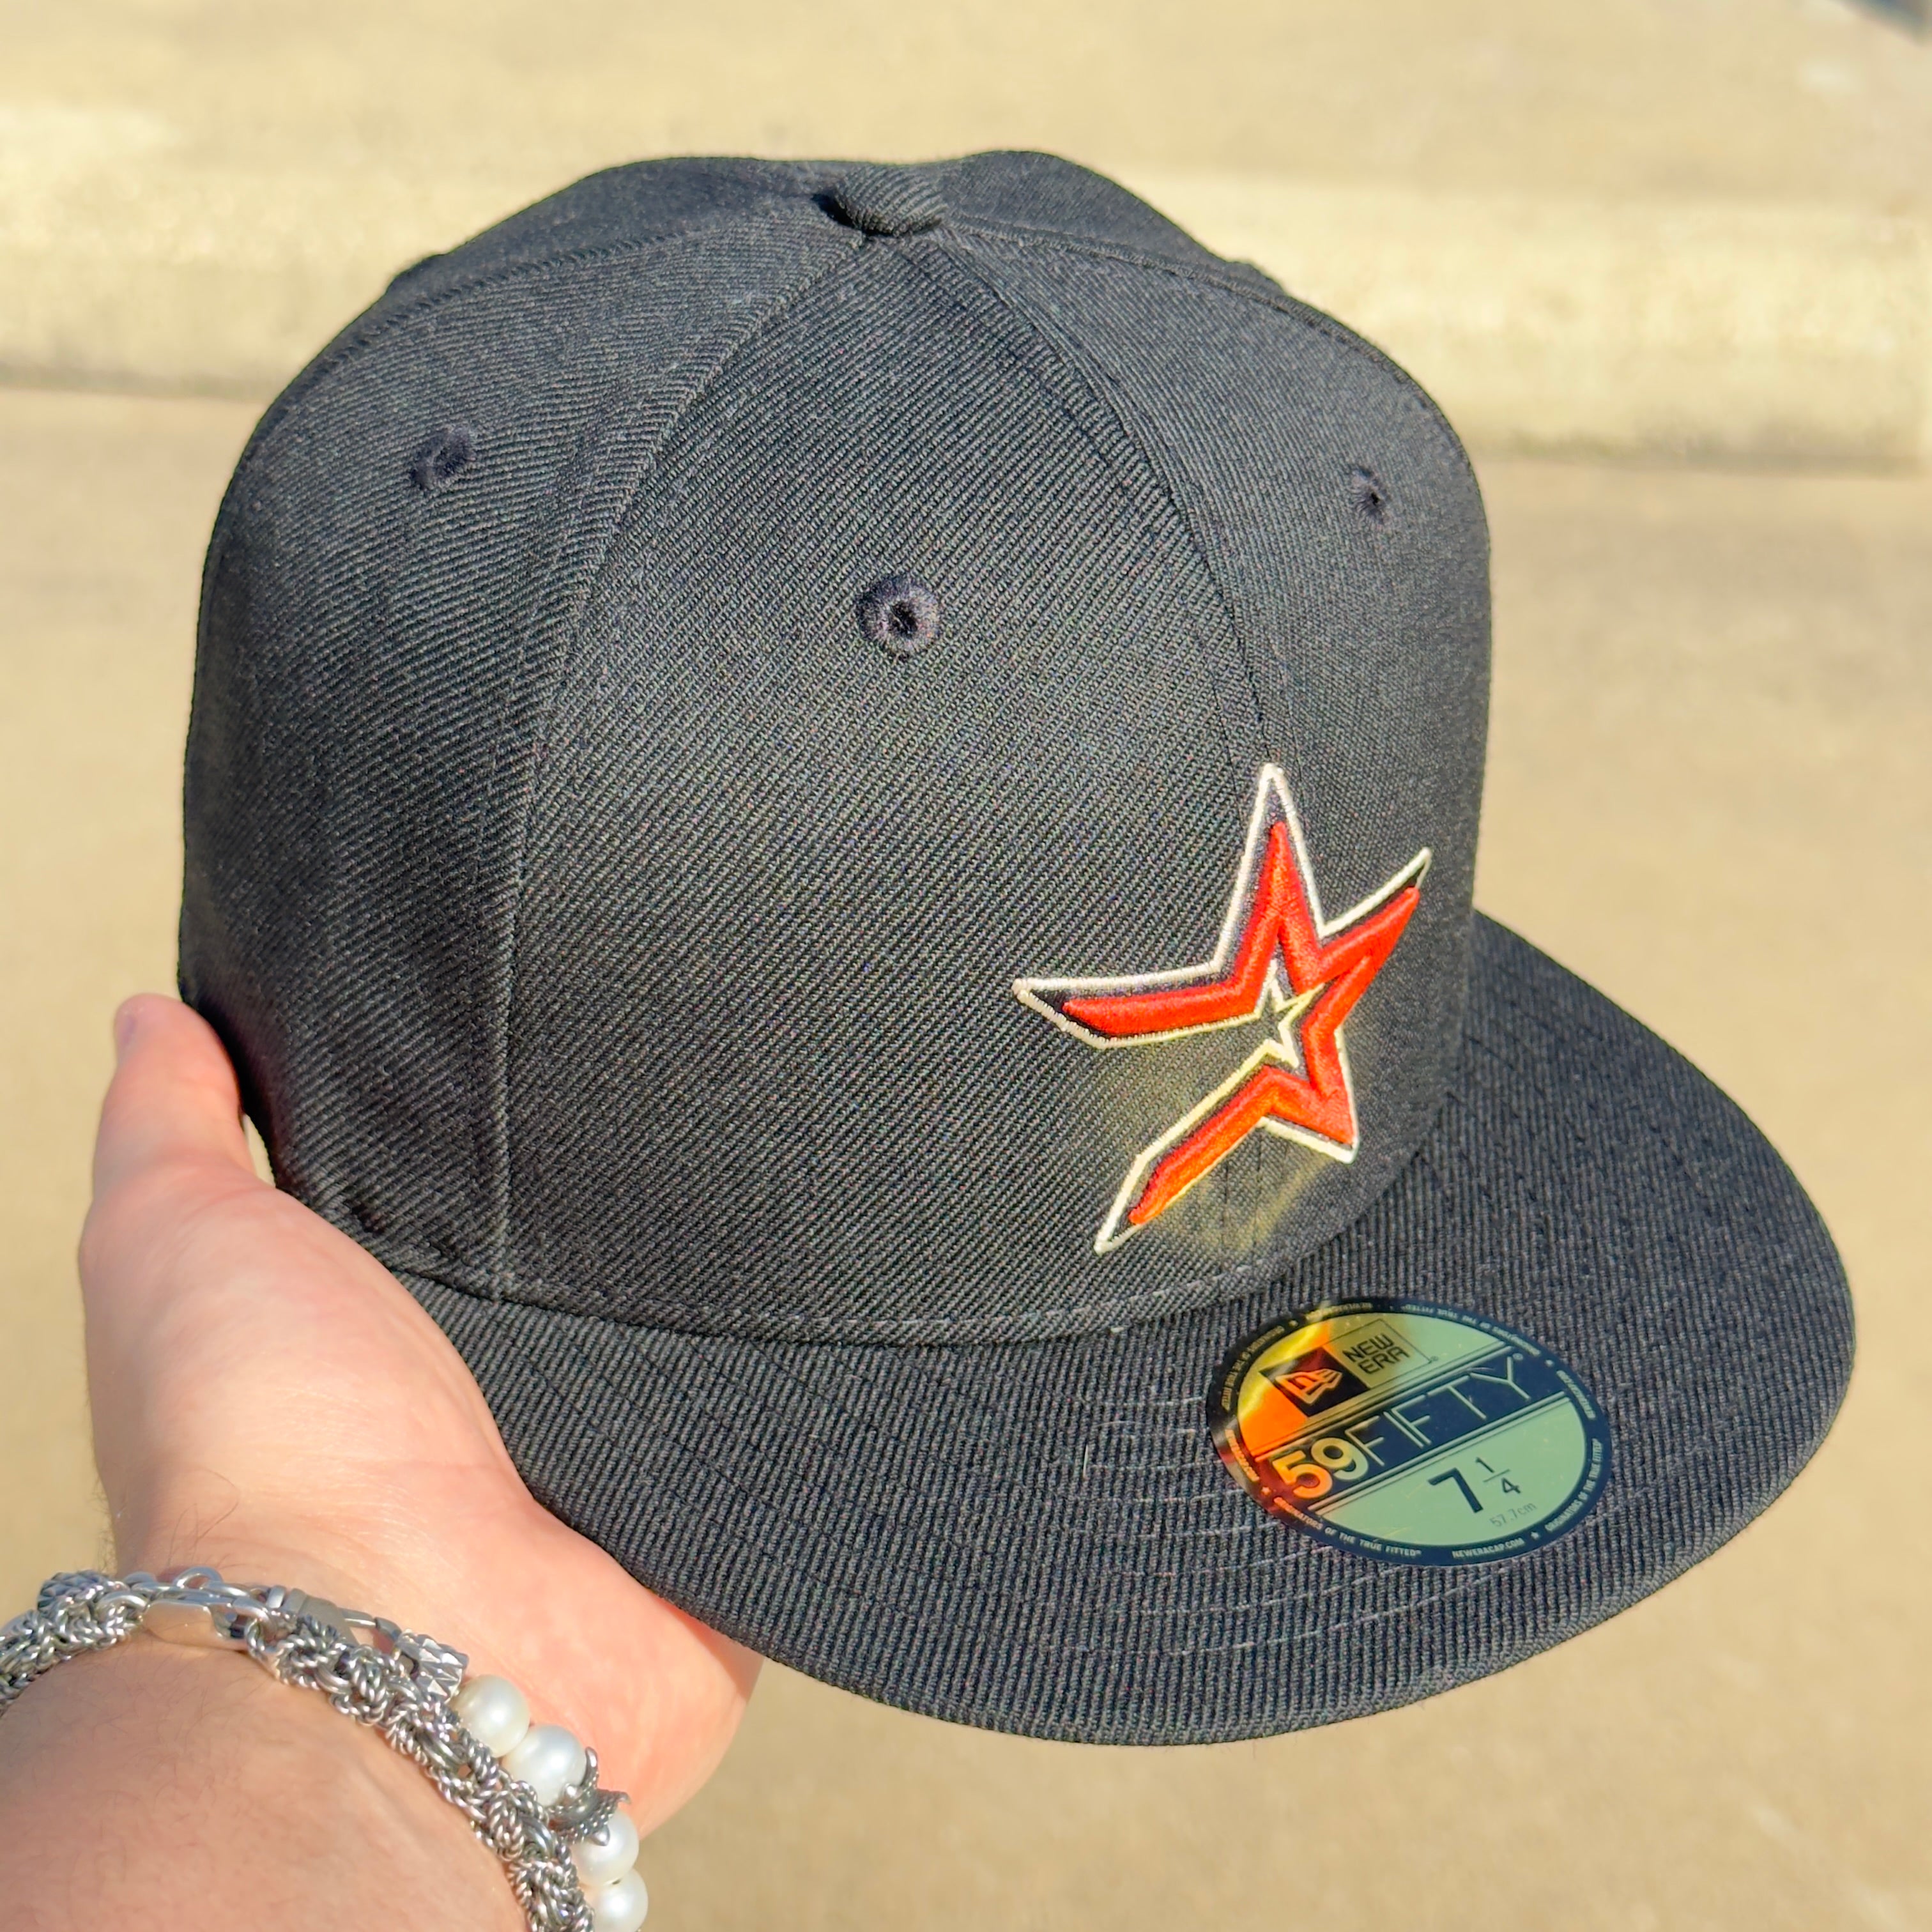 Black Houston Astros World Series 2005 Wool 59fifty New Era Fitted Cap Hat sun